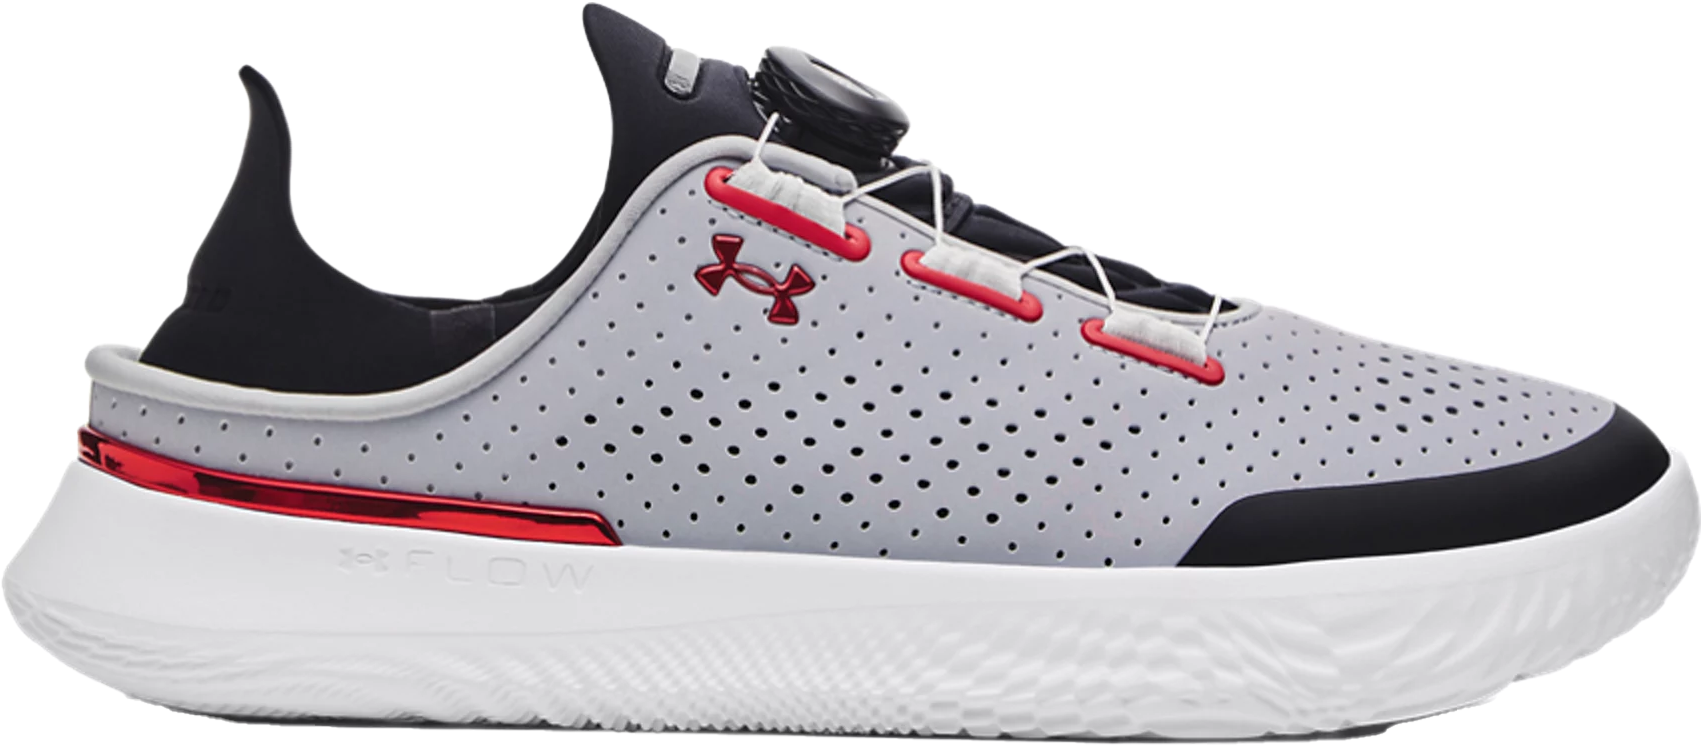 Under Armour UA Slipspeed Trainer NB-GRY Fitness cipők